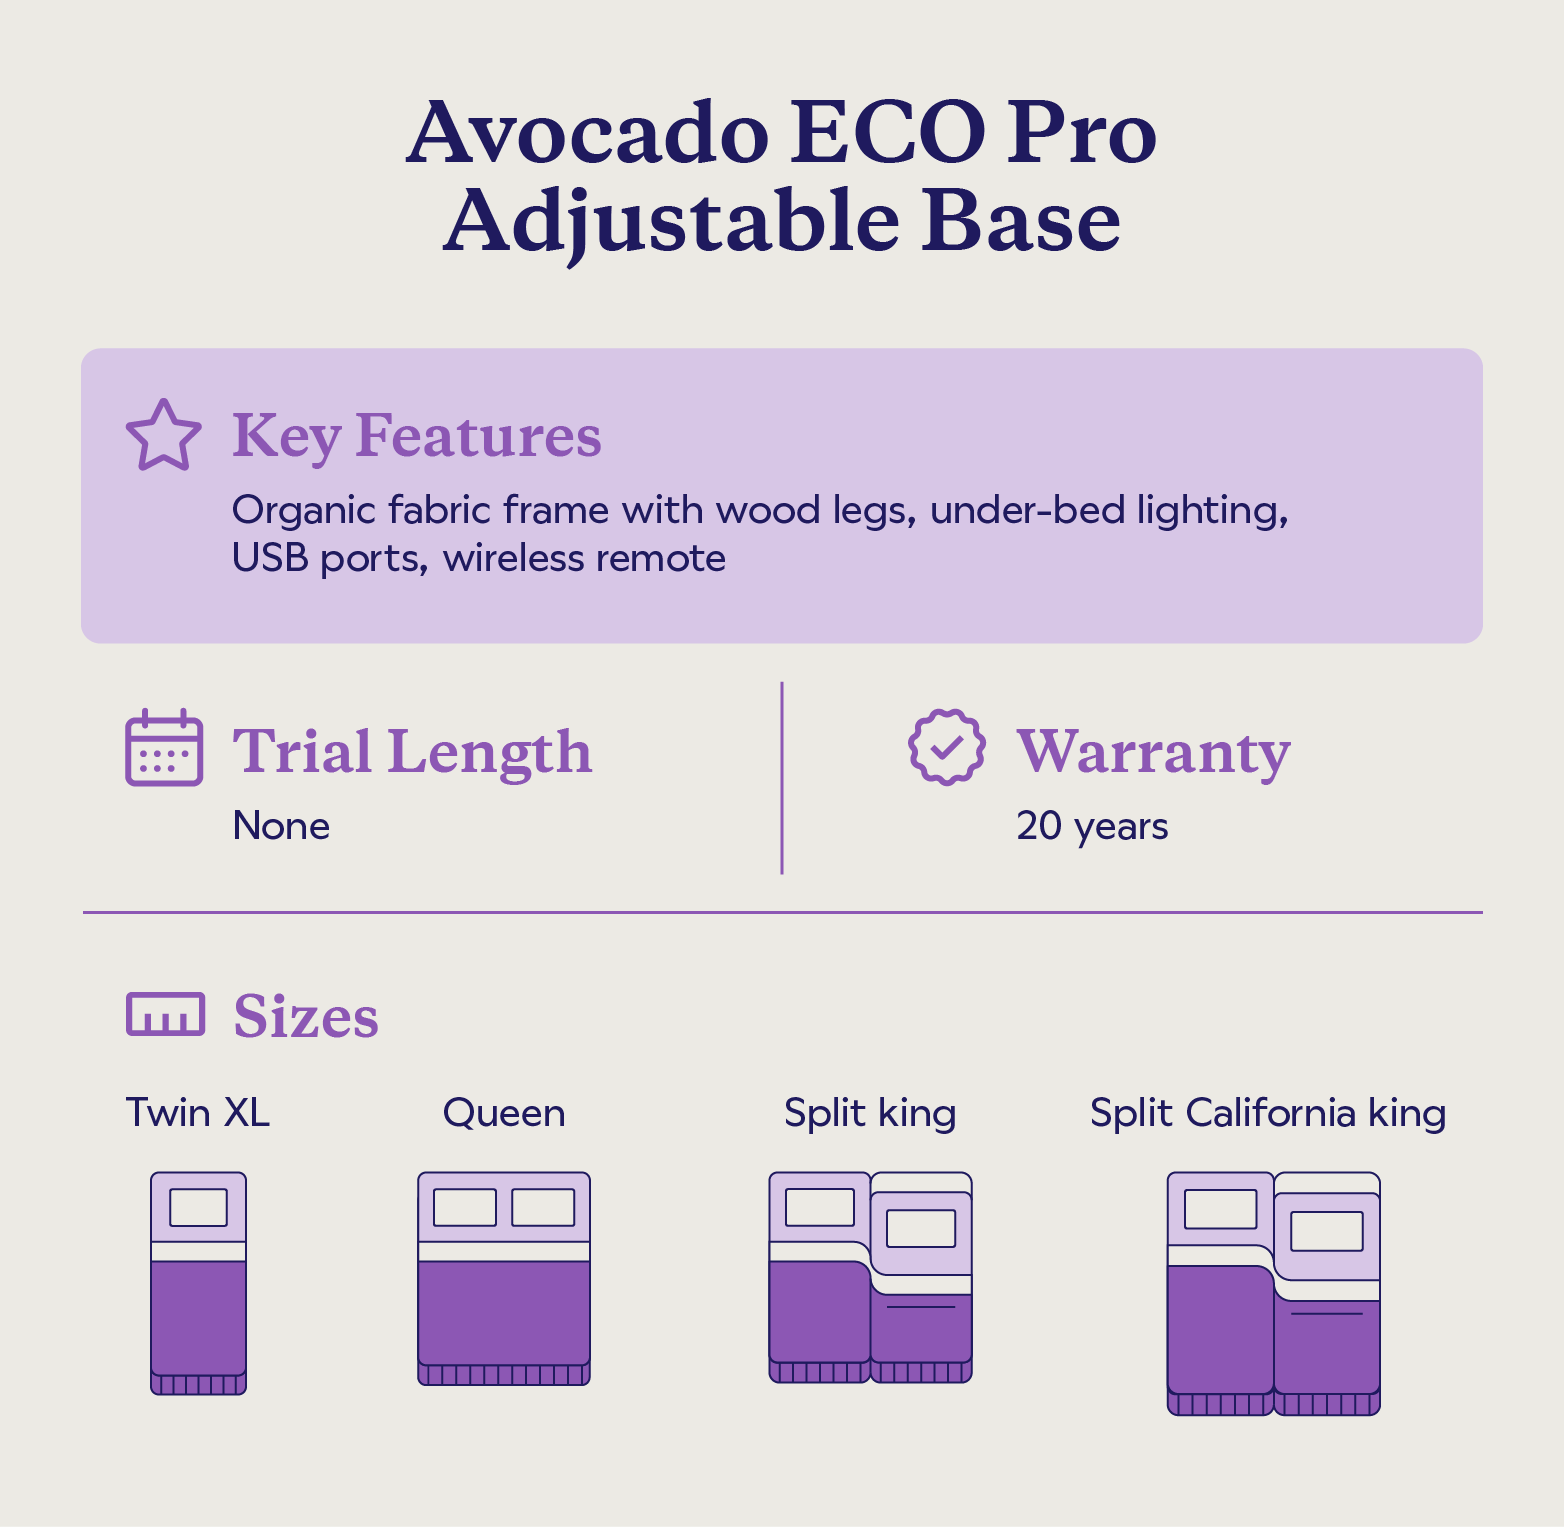 Key features and sizes of the Avocado ECO Pro Adjustable Base.